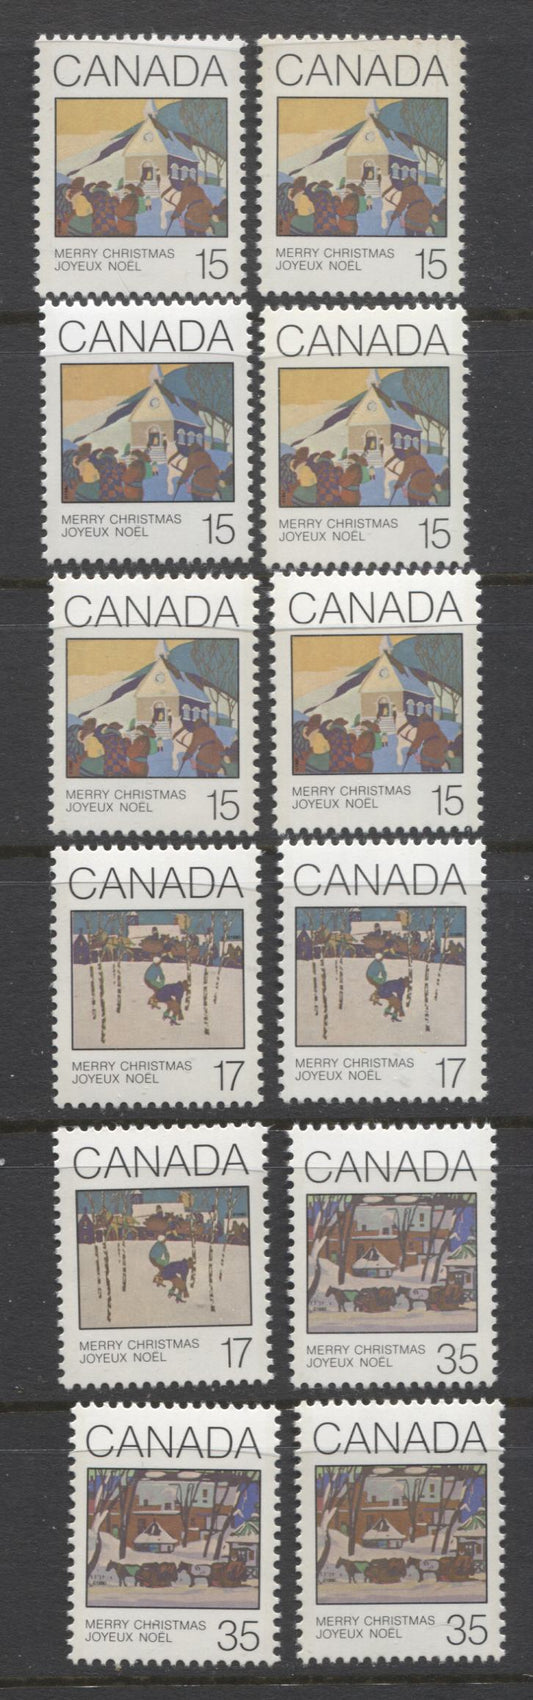 Lot 356 Canada #870-872 15c-35c Multicoloured Christmas Scenes, 1980 Christmas Issue, 12 VFNH Singles, Various DF/DF, NF/NF, NF/NF-fl Papers